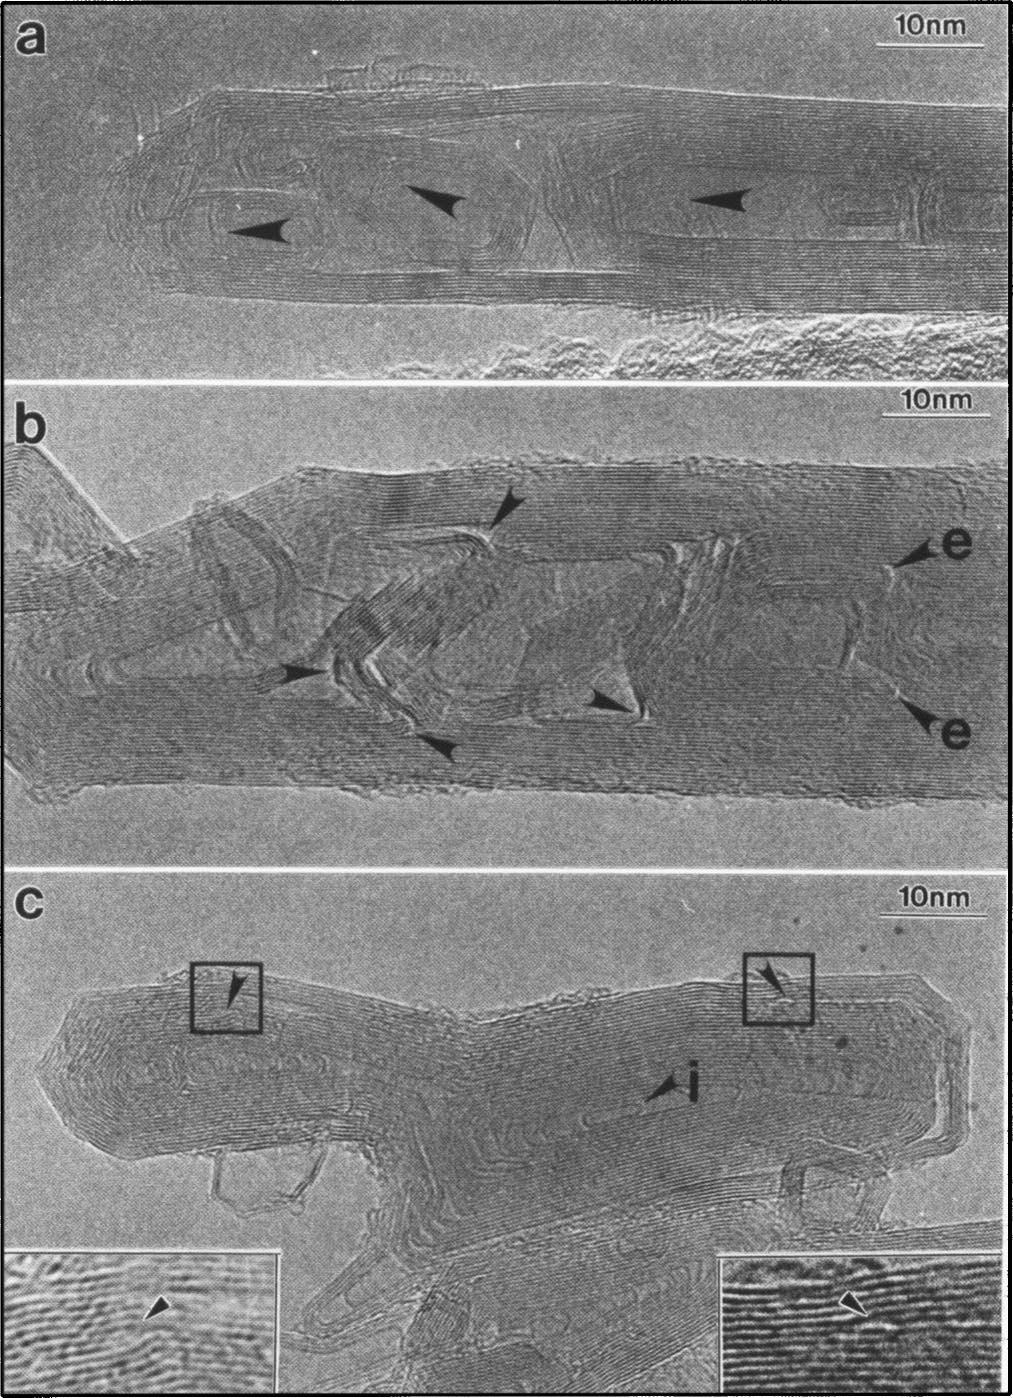 J. Appl. Phys., Vol. 93, No. 12, 15 June 2003 D. Zhou and L. Chow 9973 FIG. 2. a An HRTEM image shows that two nanotubes A andb are constructed together.